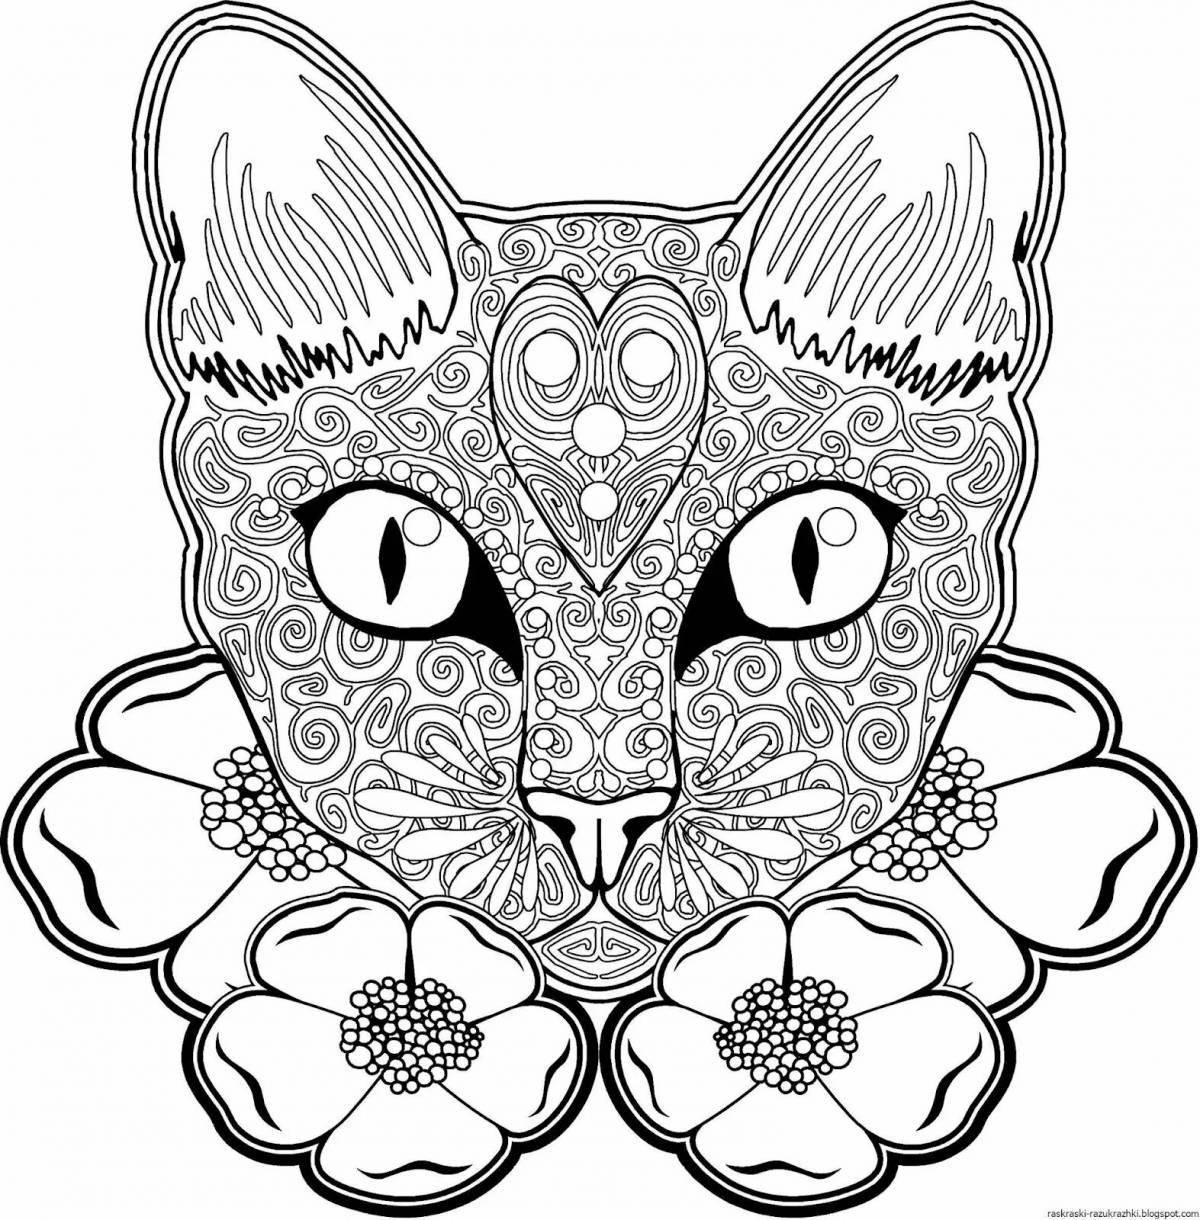 Cozy coloring book anti-stress kitty